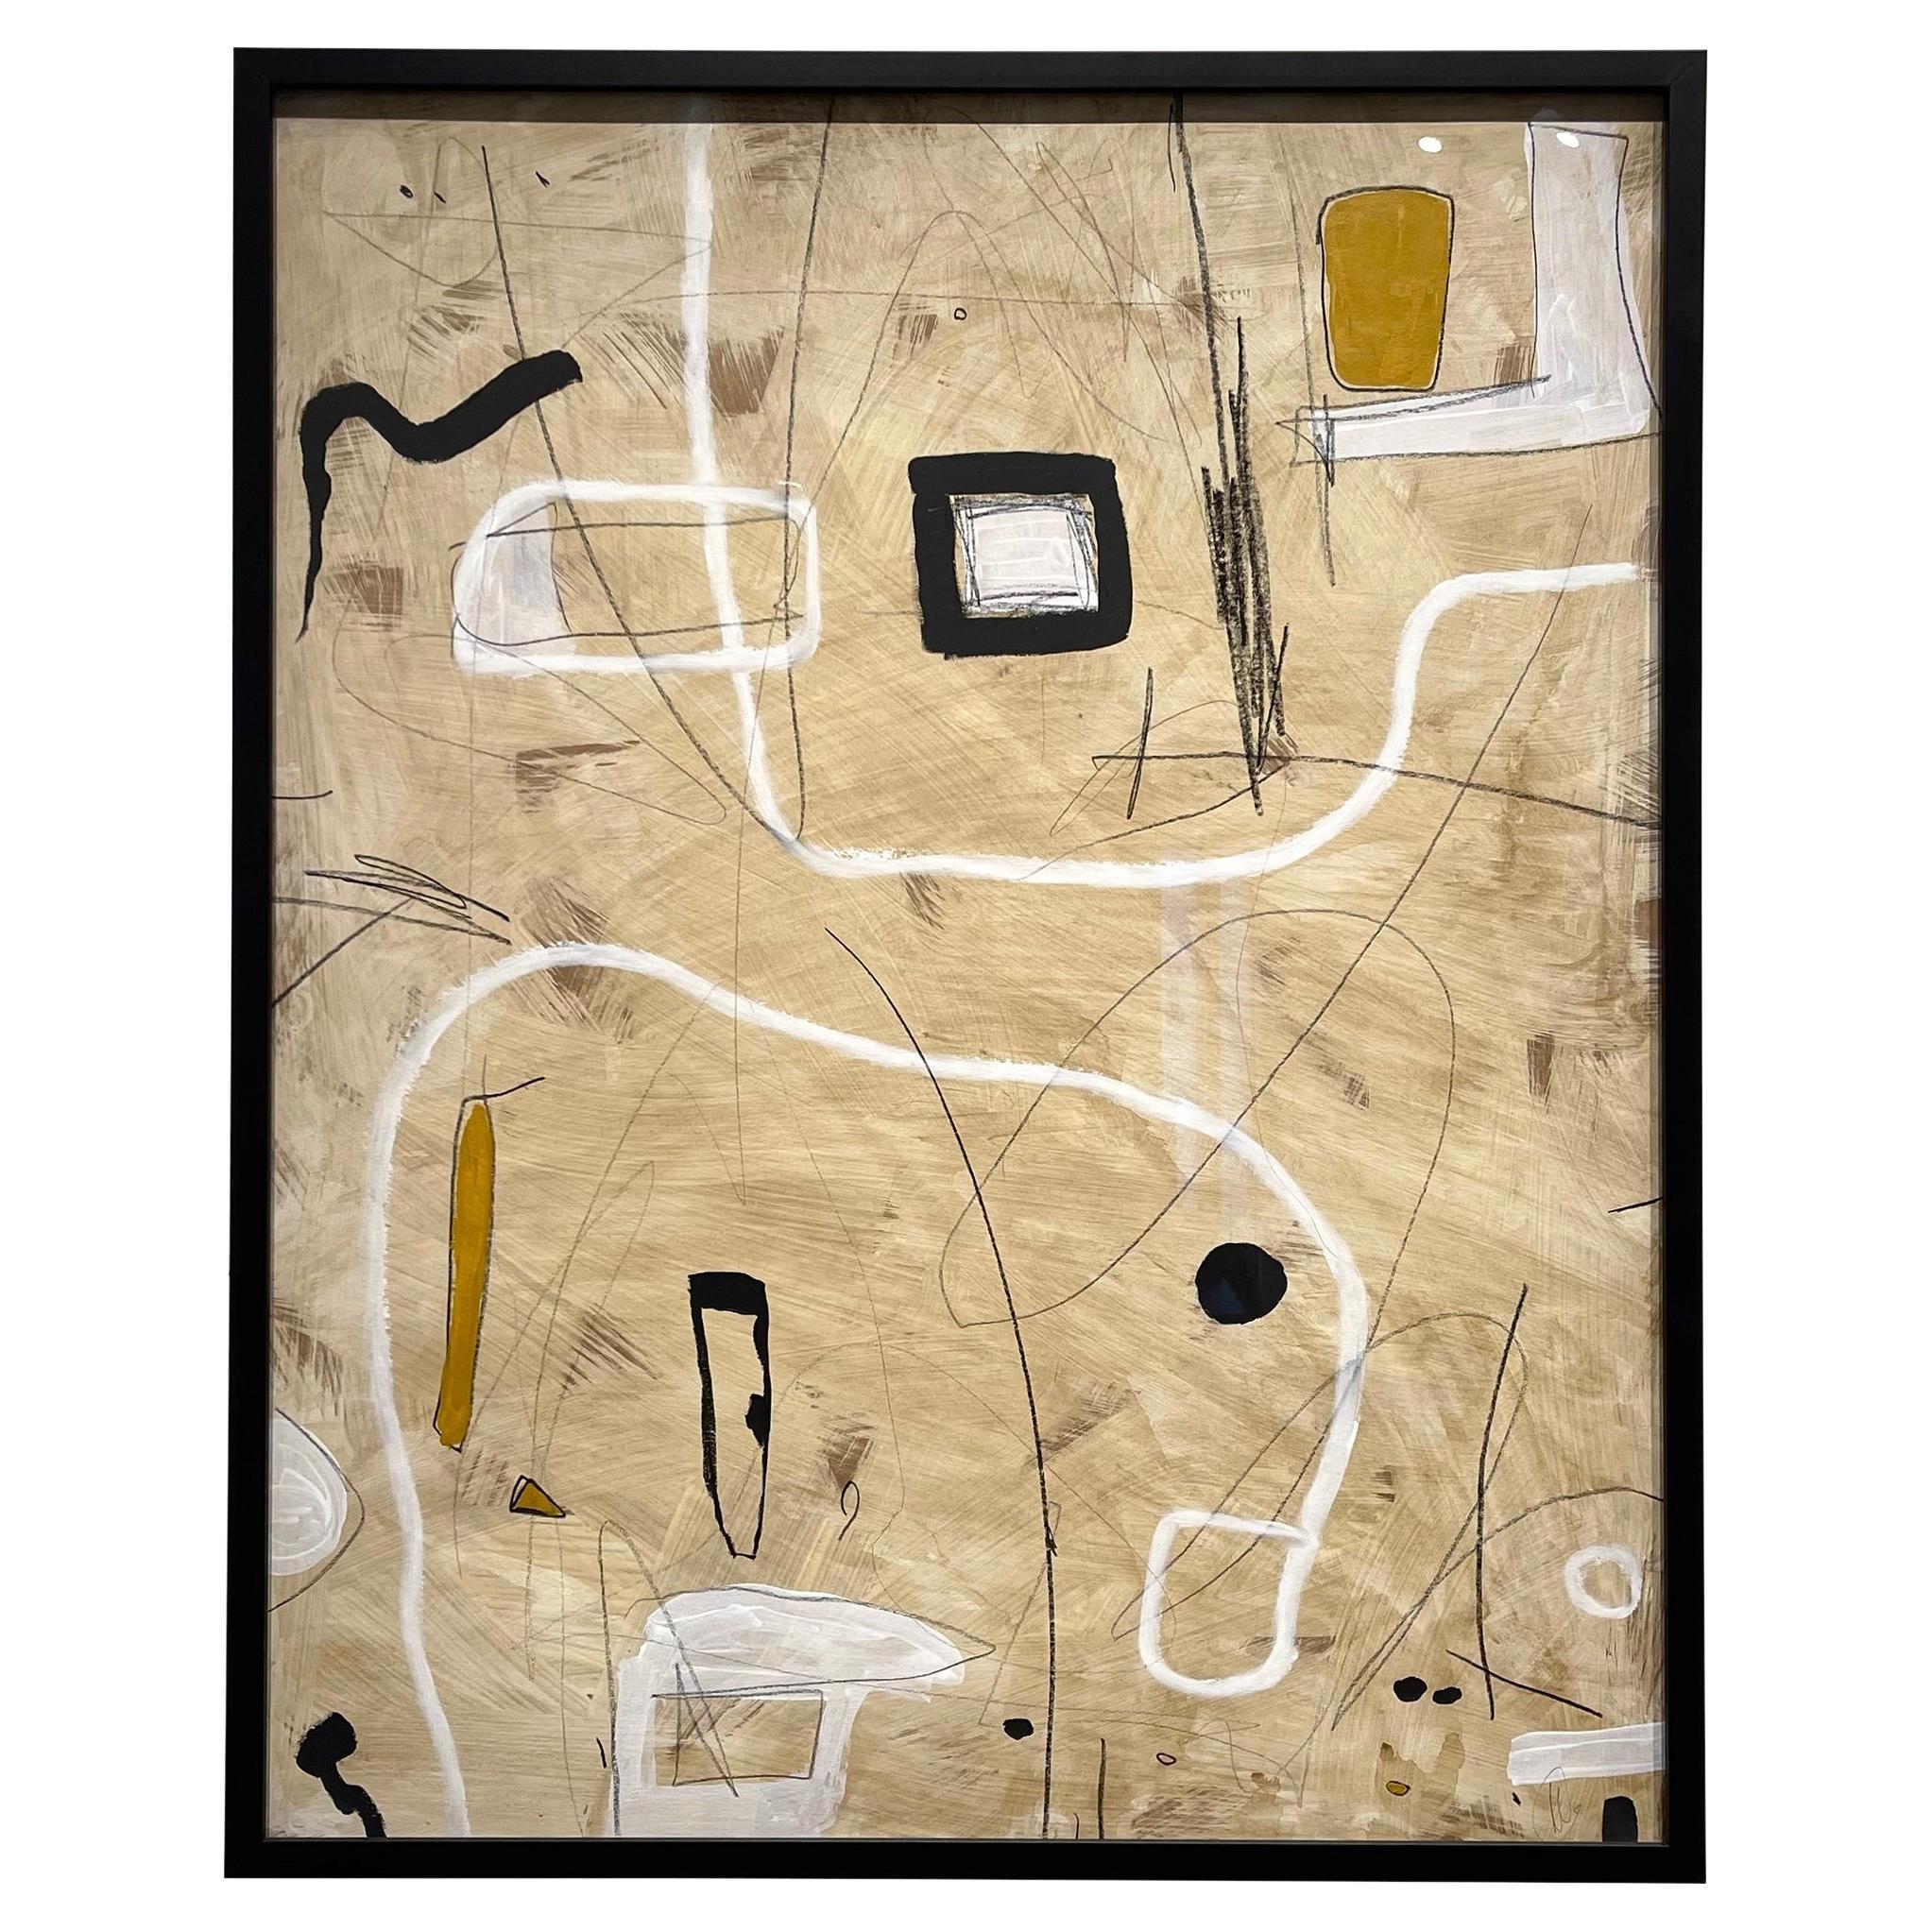 Untitled #131 by Murray Duncan, mix media on paper, framed, abstract, geometric